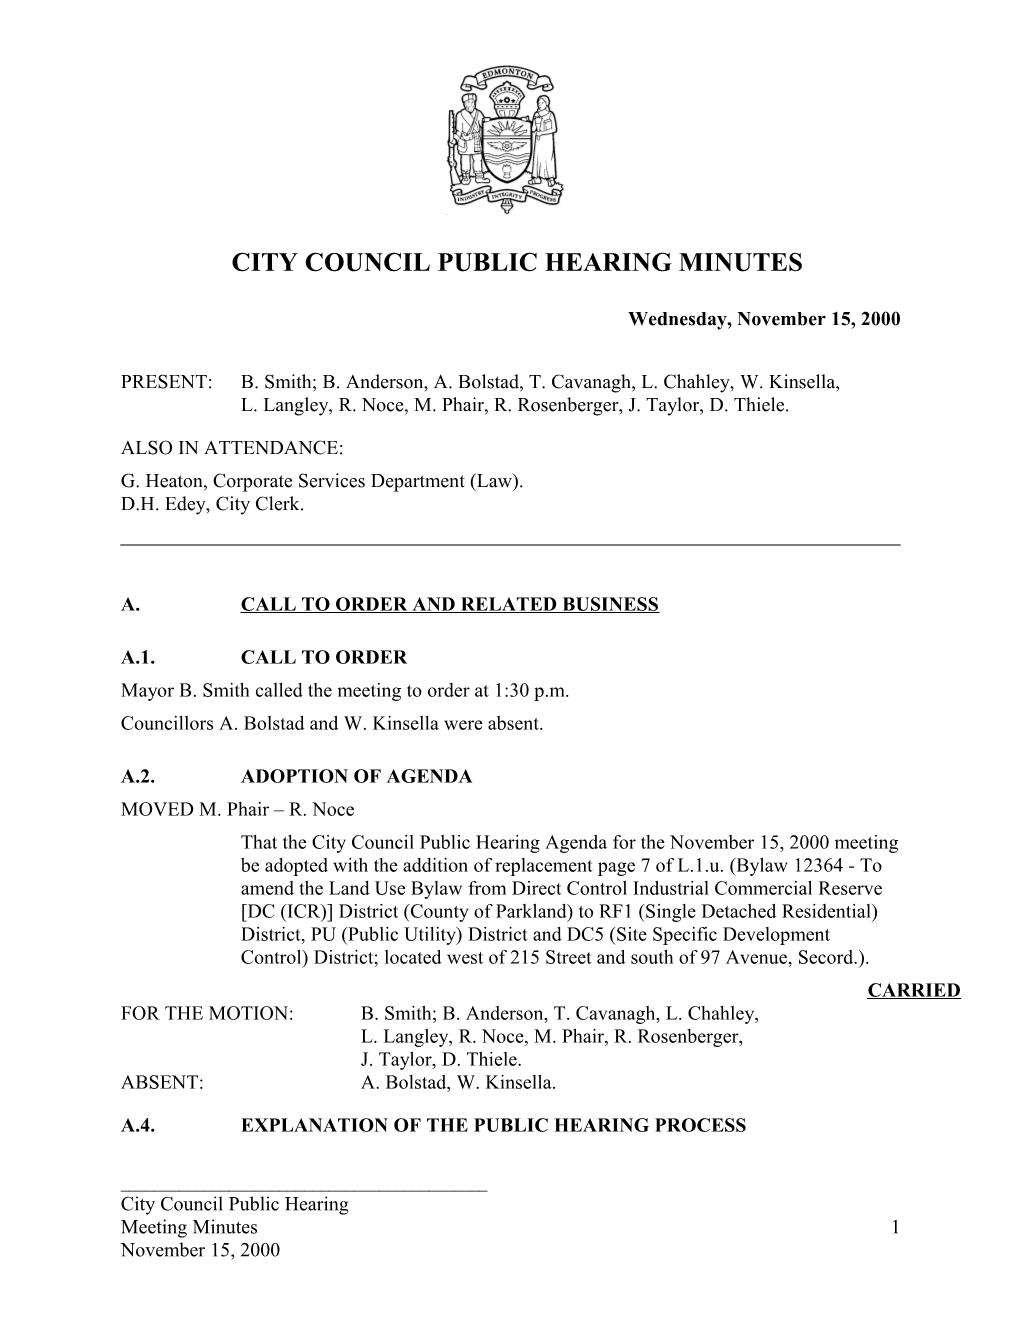 Minutes for City Council November 15, 2000 Meeting